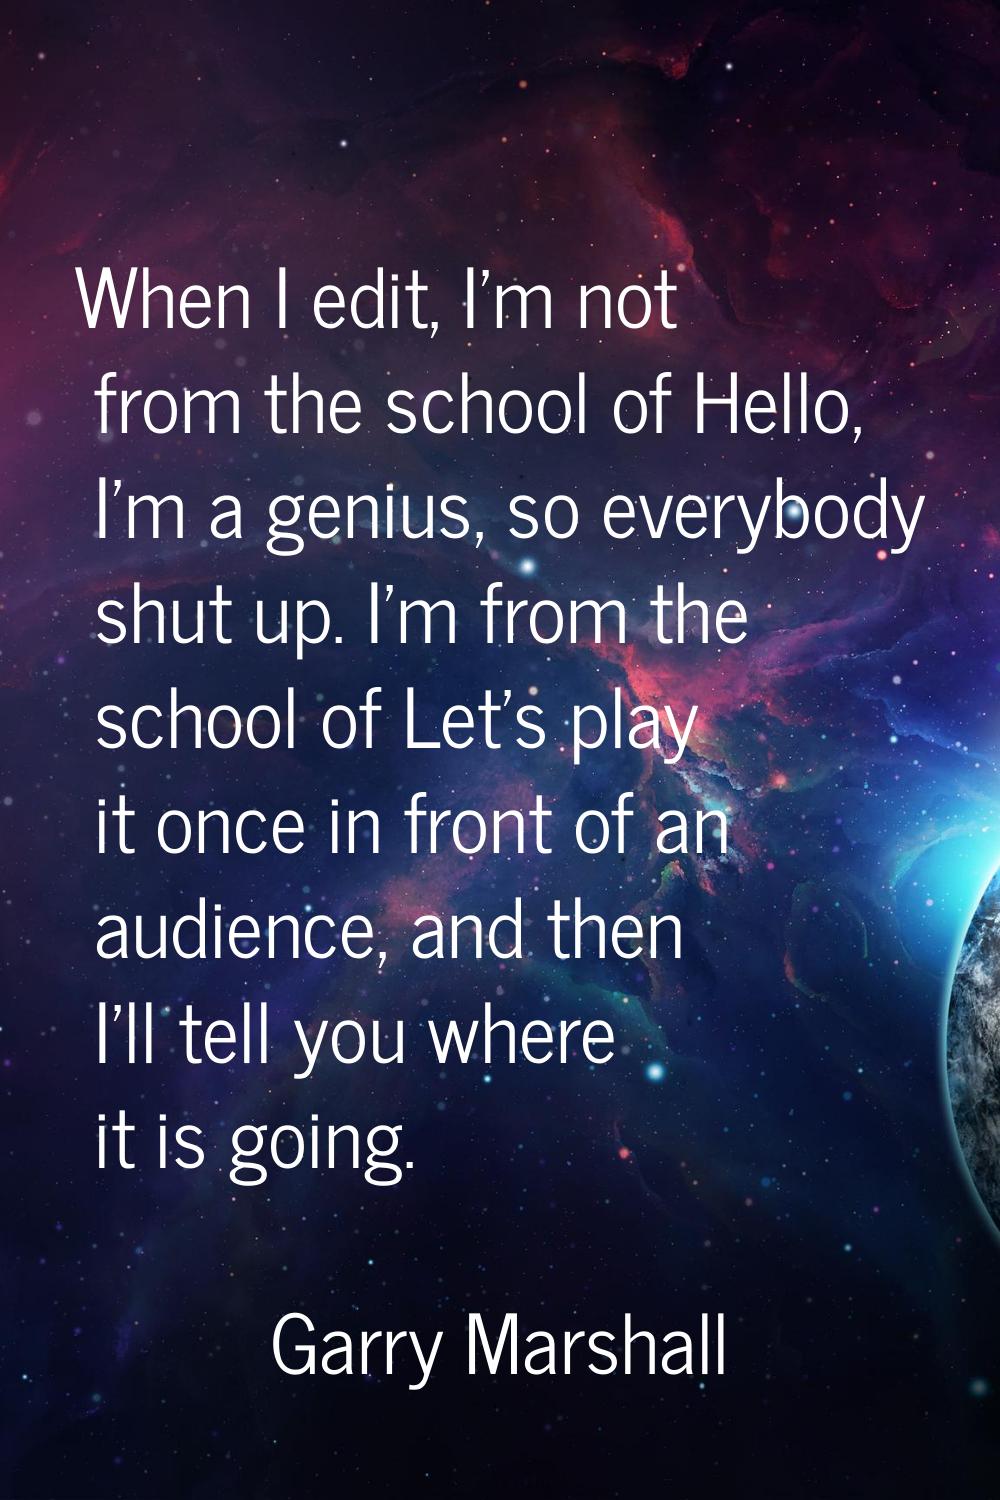 When I edit, I'm not from the school of Hello, I'm a genius, so everybody shut up. I'm from the sch